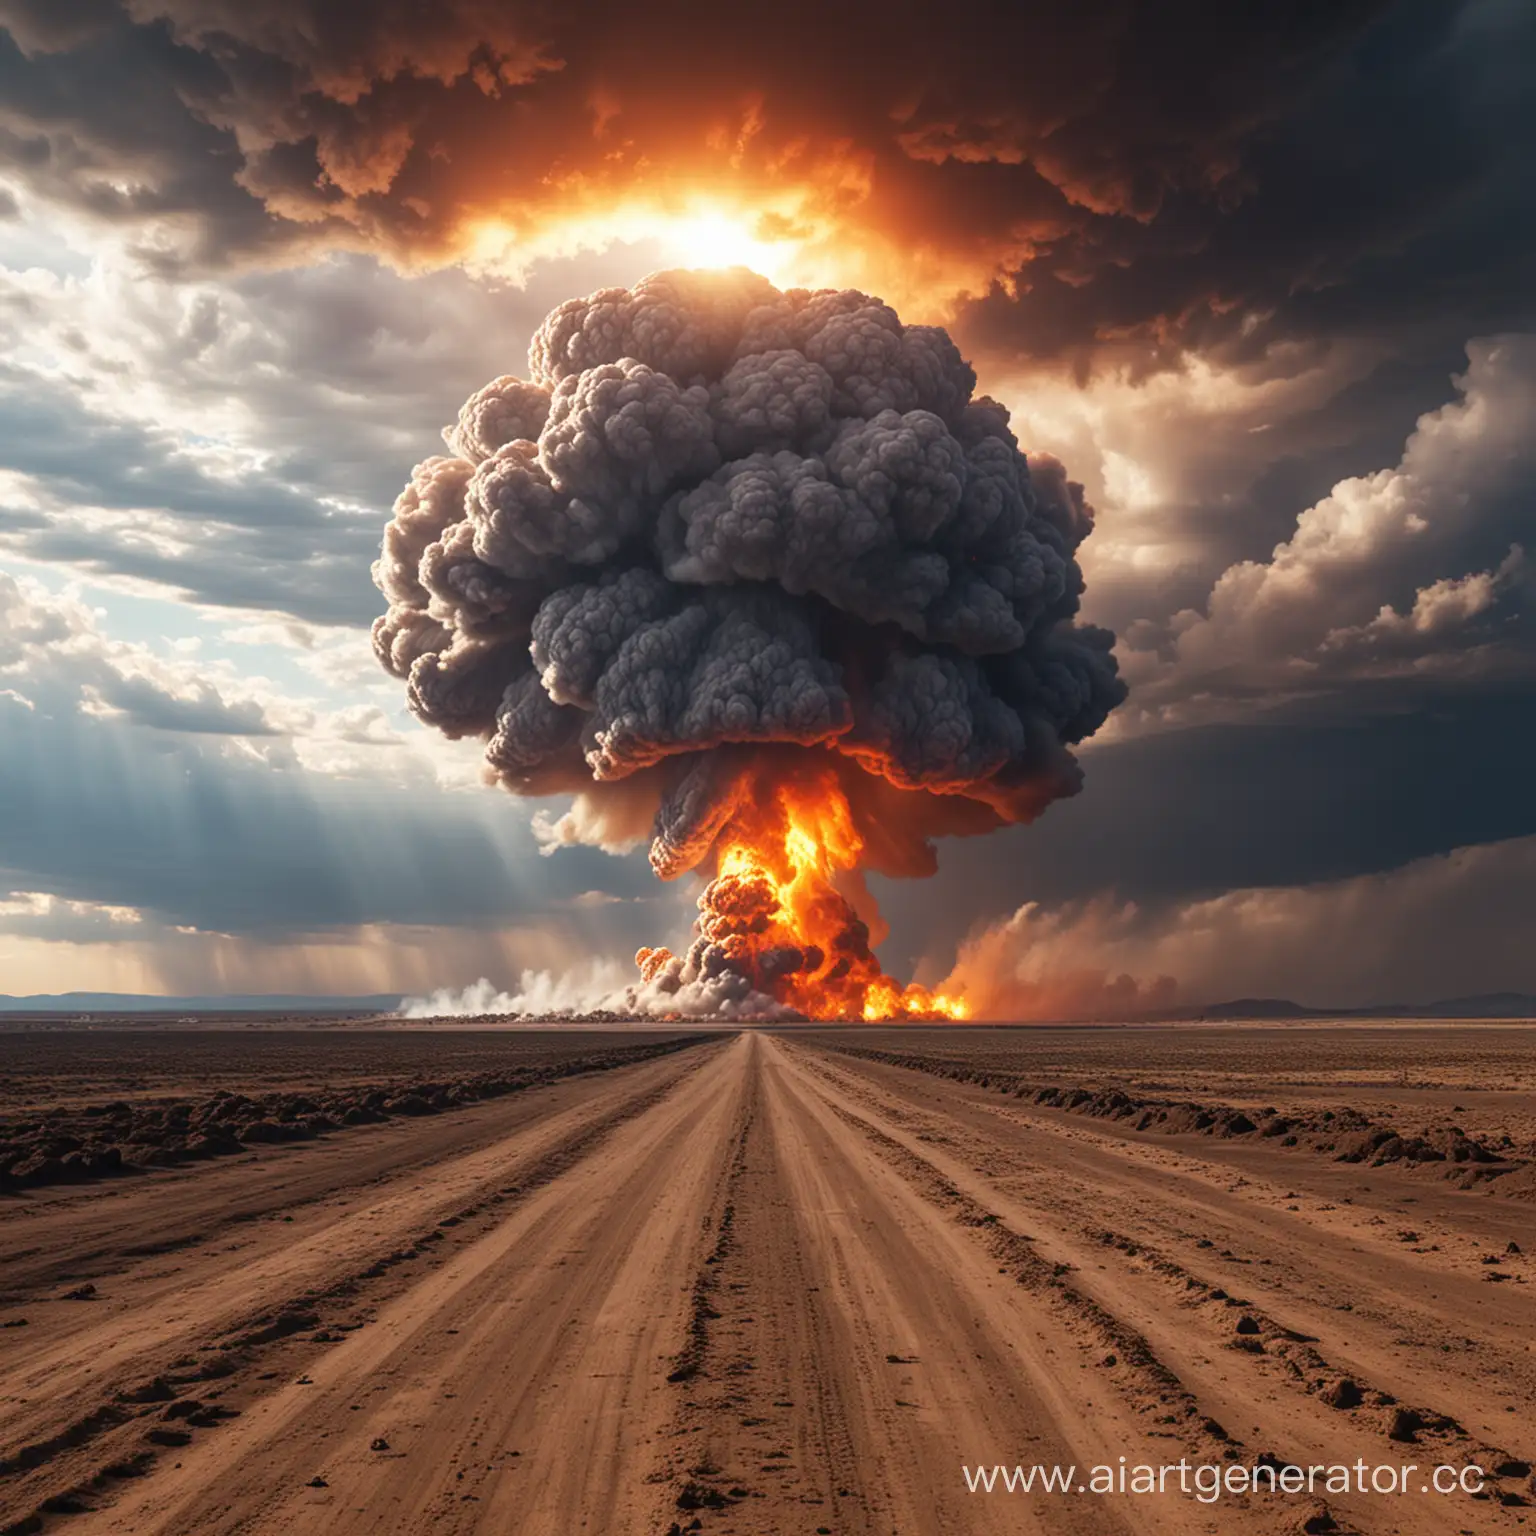 Apocalyptic-Scene-Nuclear-Explosion-with-Fiery-Clouds